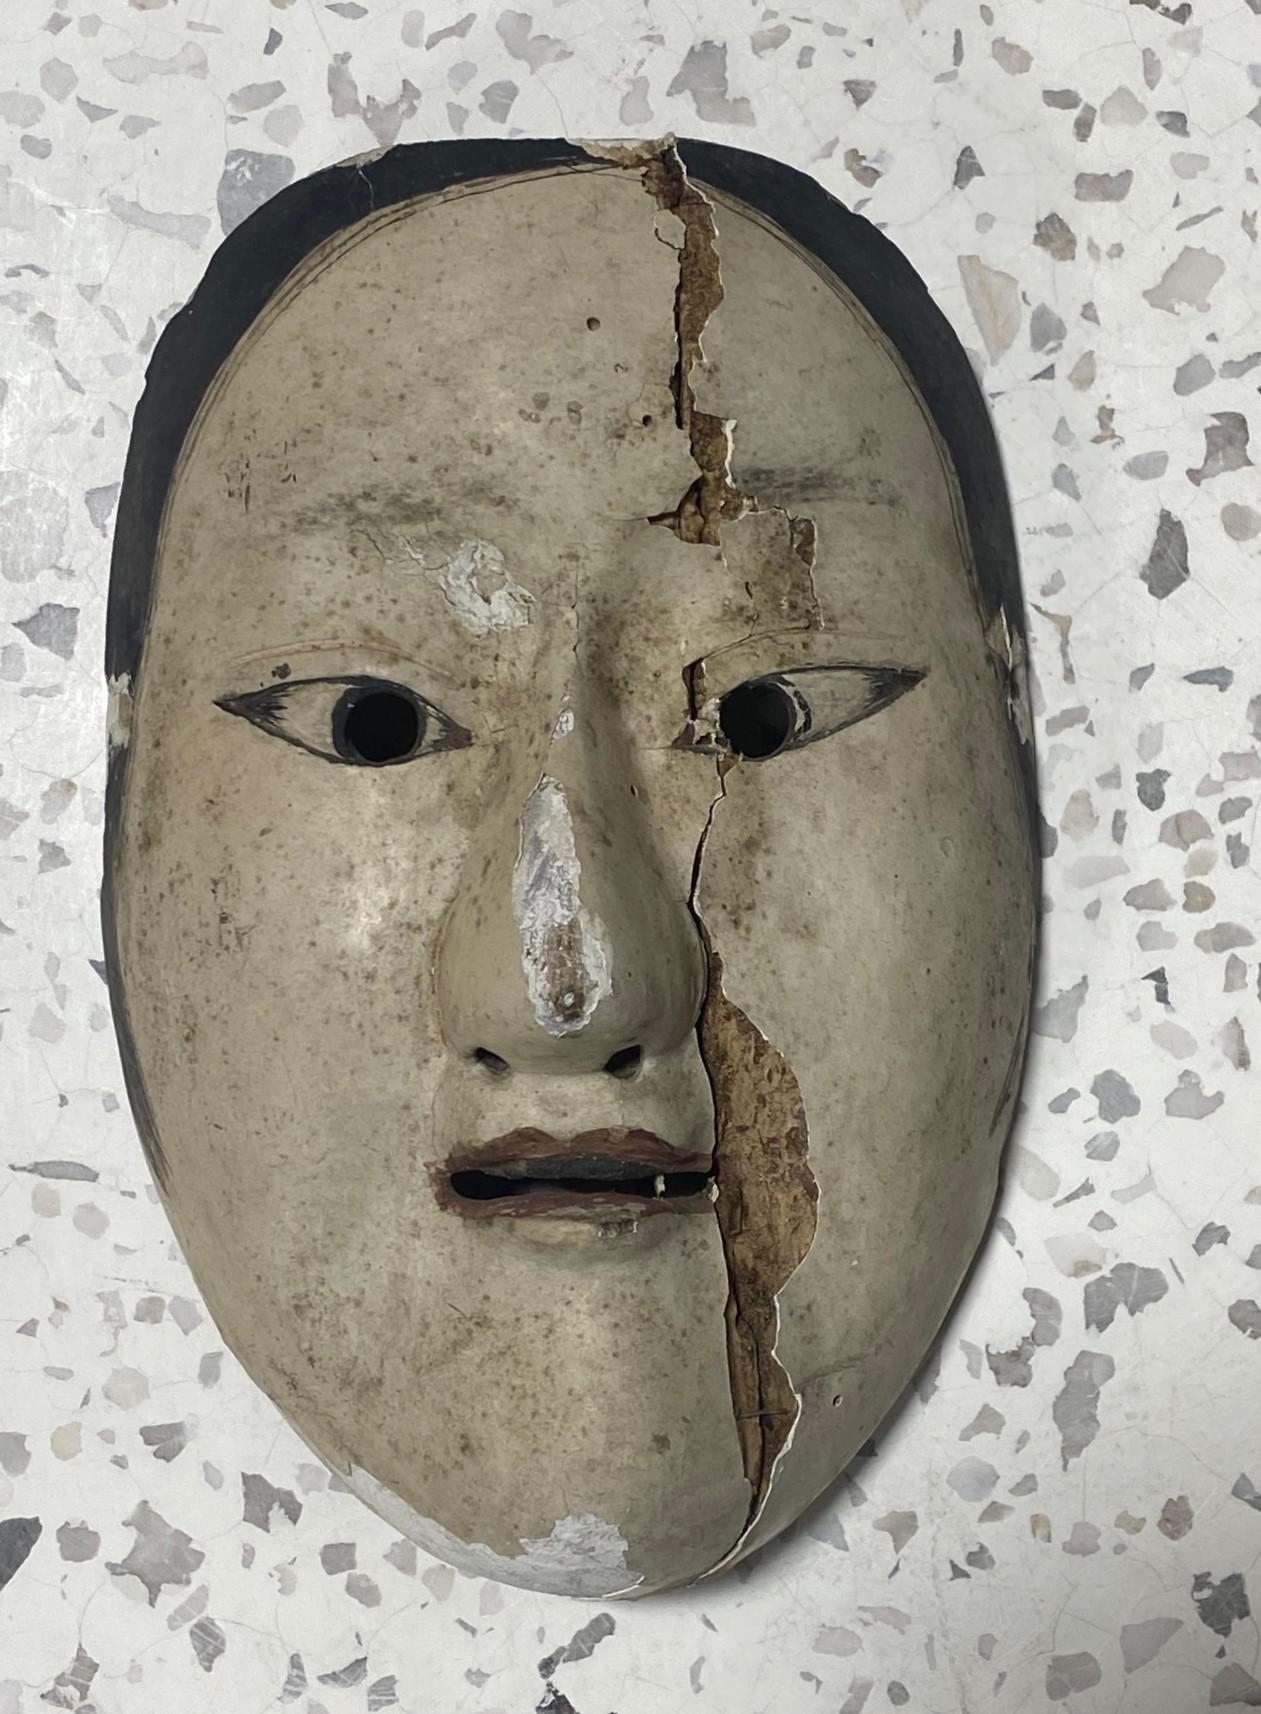 A truly beautiful, wonderfully aged, alluring mask made for Japanese Noh theater. The naturally faded beauty and unique character drew us to this mask immediately. 

The mask is handcrafted and hand-carved from natural wood, clearly by a master of